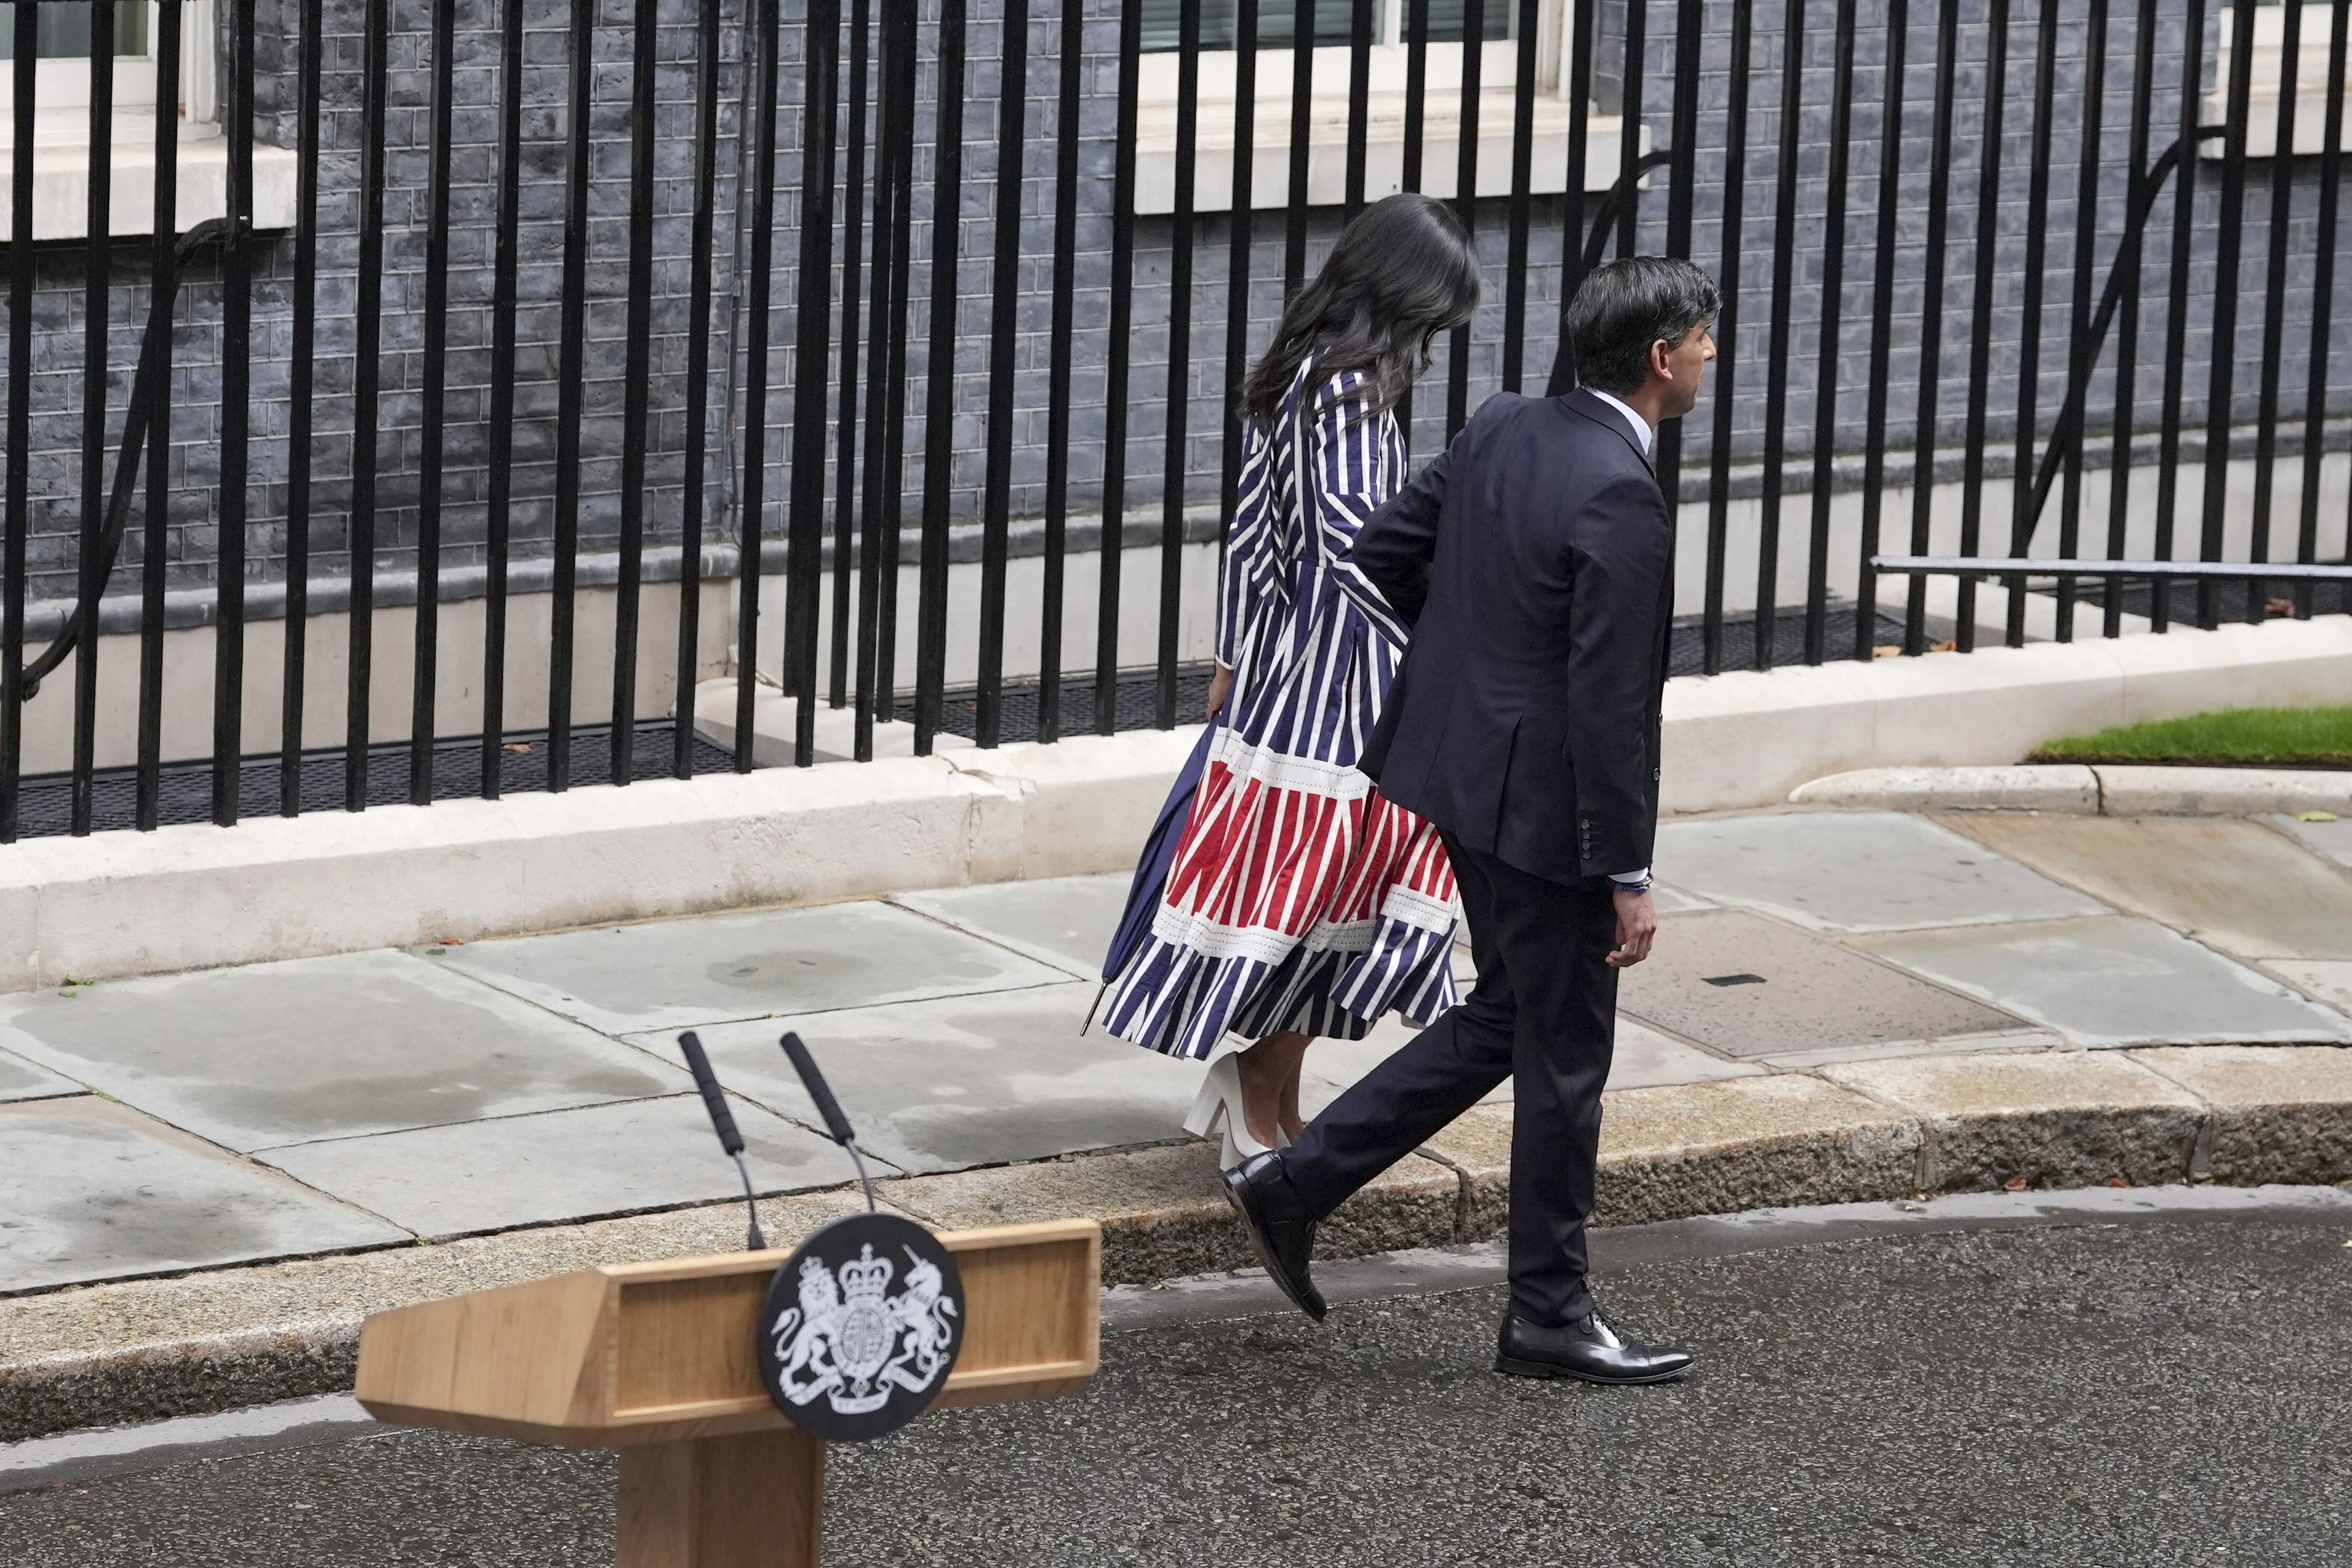 Britain's outgoing Conservative Party Prime Minister Rishi Sunak and his wife Akshata Murty walk from 10 Downing Street to a waiting car before going to see King Charles III to tender his resignation in London, Friday, July 5, 2024. Sunak and his Conservative Party lost the general election held July 4, to the Labour Party, whose leader Keir Starmer is set become Prime Minister later Friday. (Gareth Fuller/PA via AP)